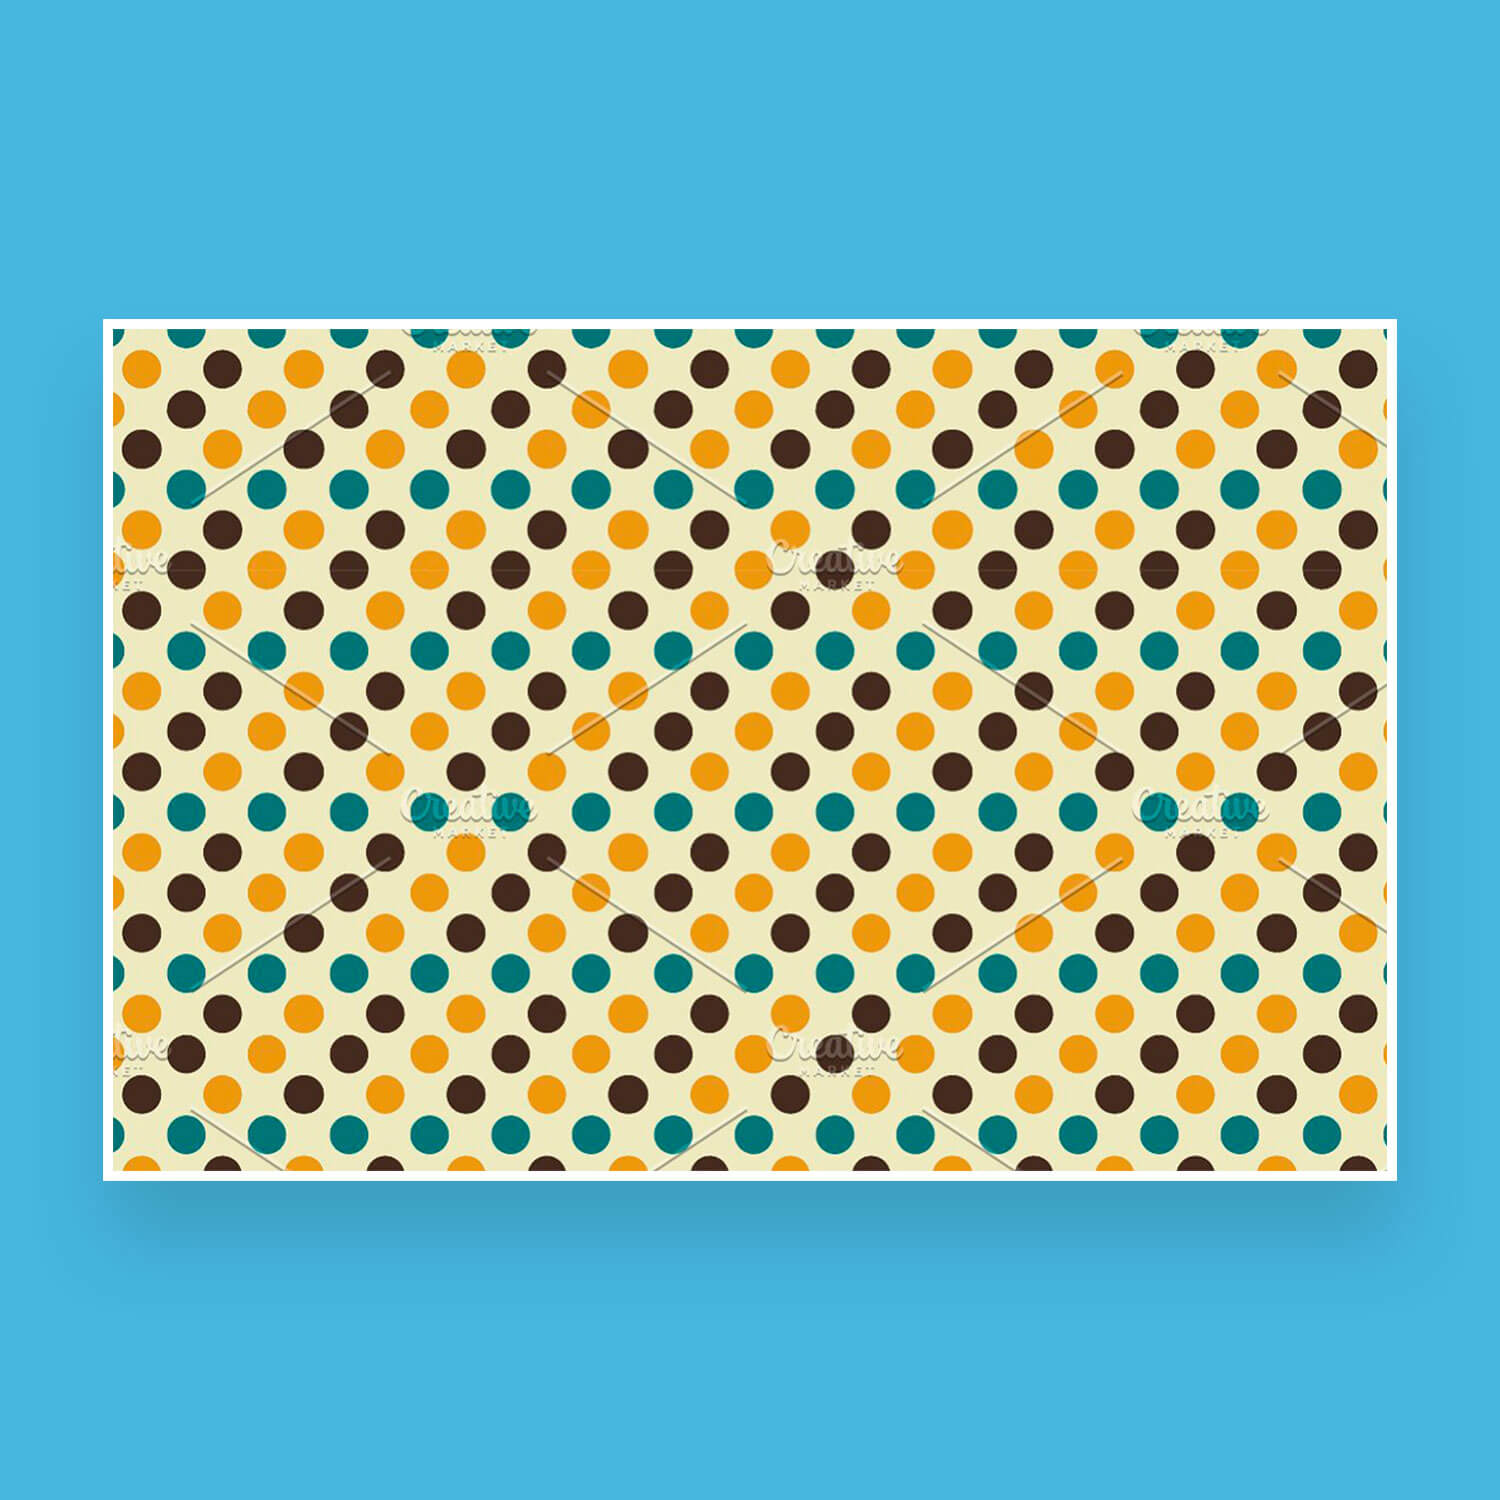 Pattern with retro patterns in the form of circles of brown, green and yellow colors on a turquoise background.